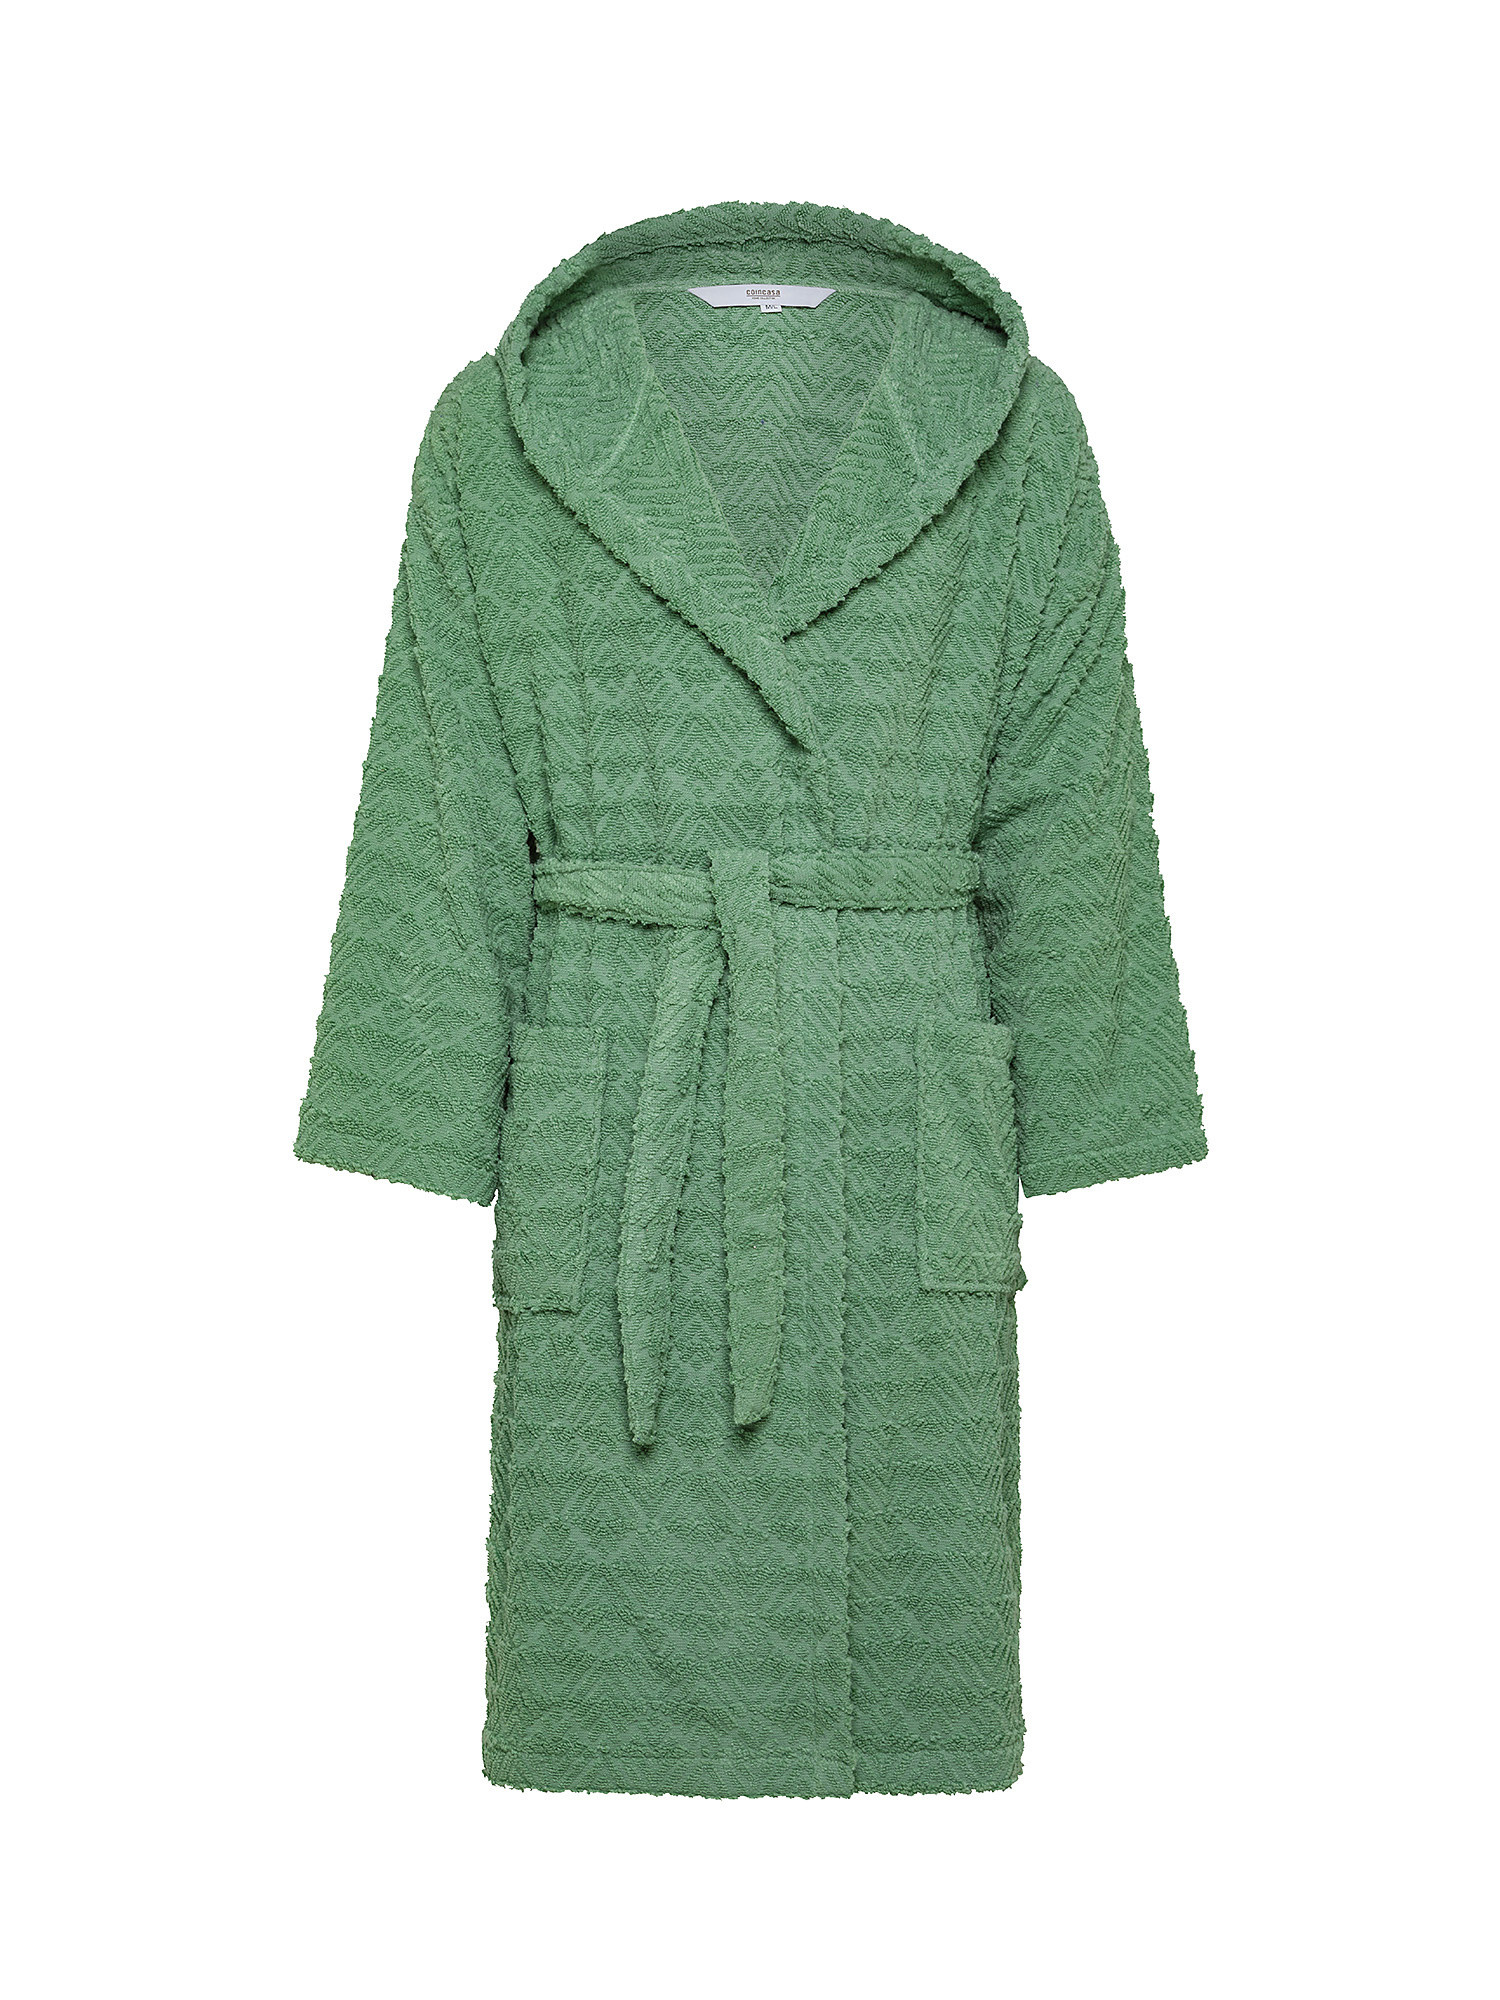 Terry cotton bathrobe with geometric pattern, Sage Green, large image number 0